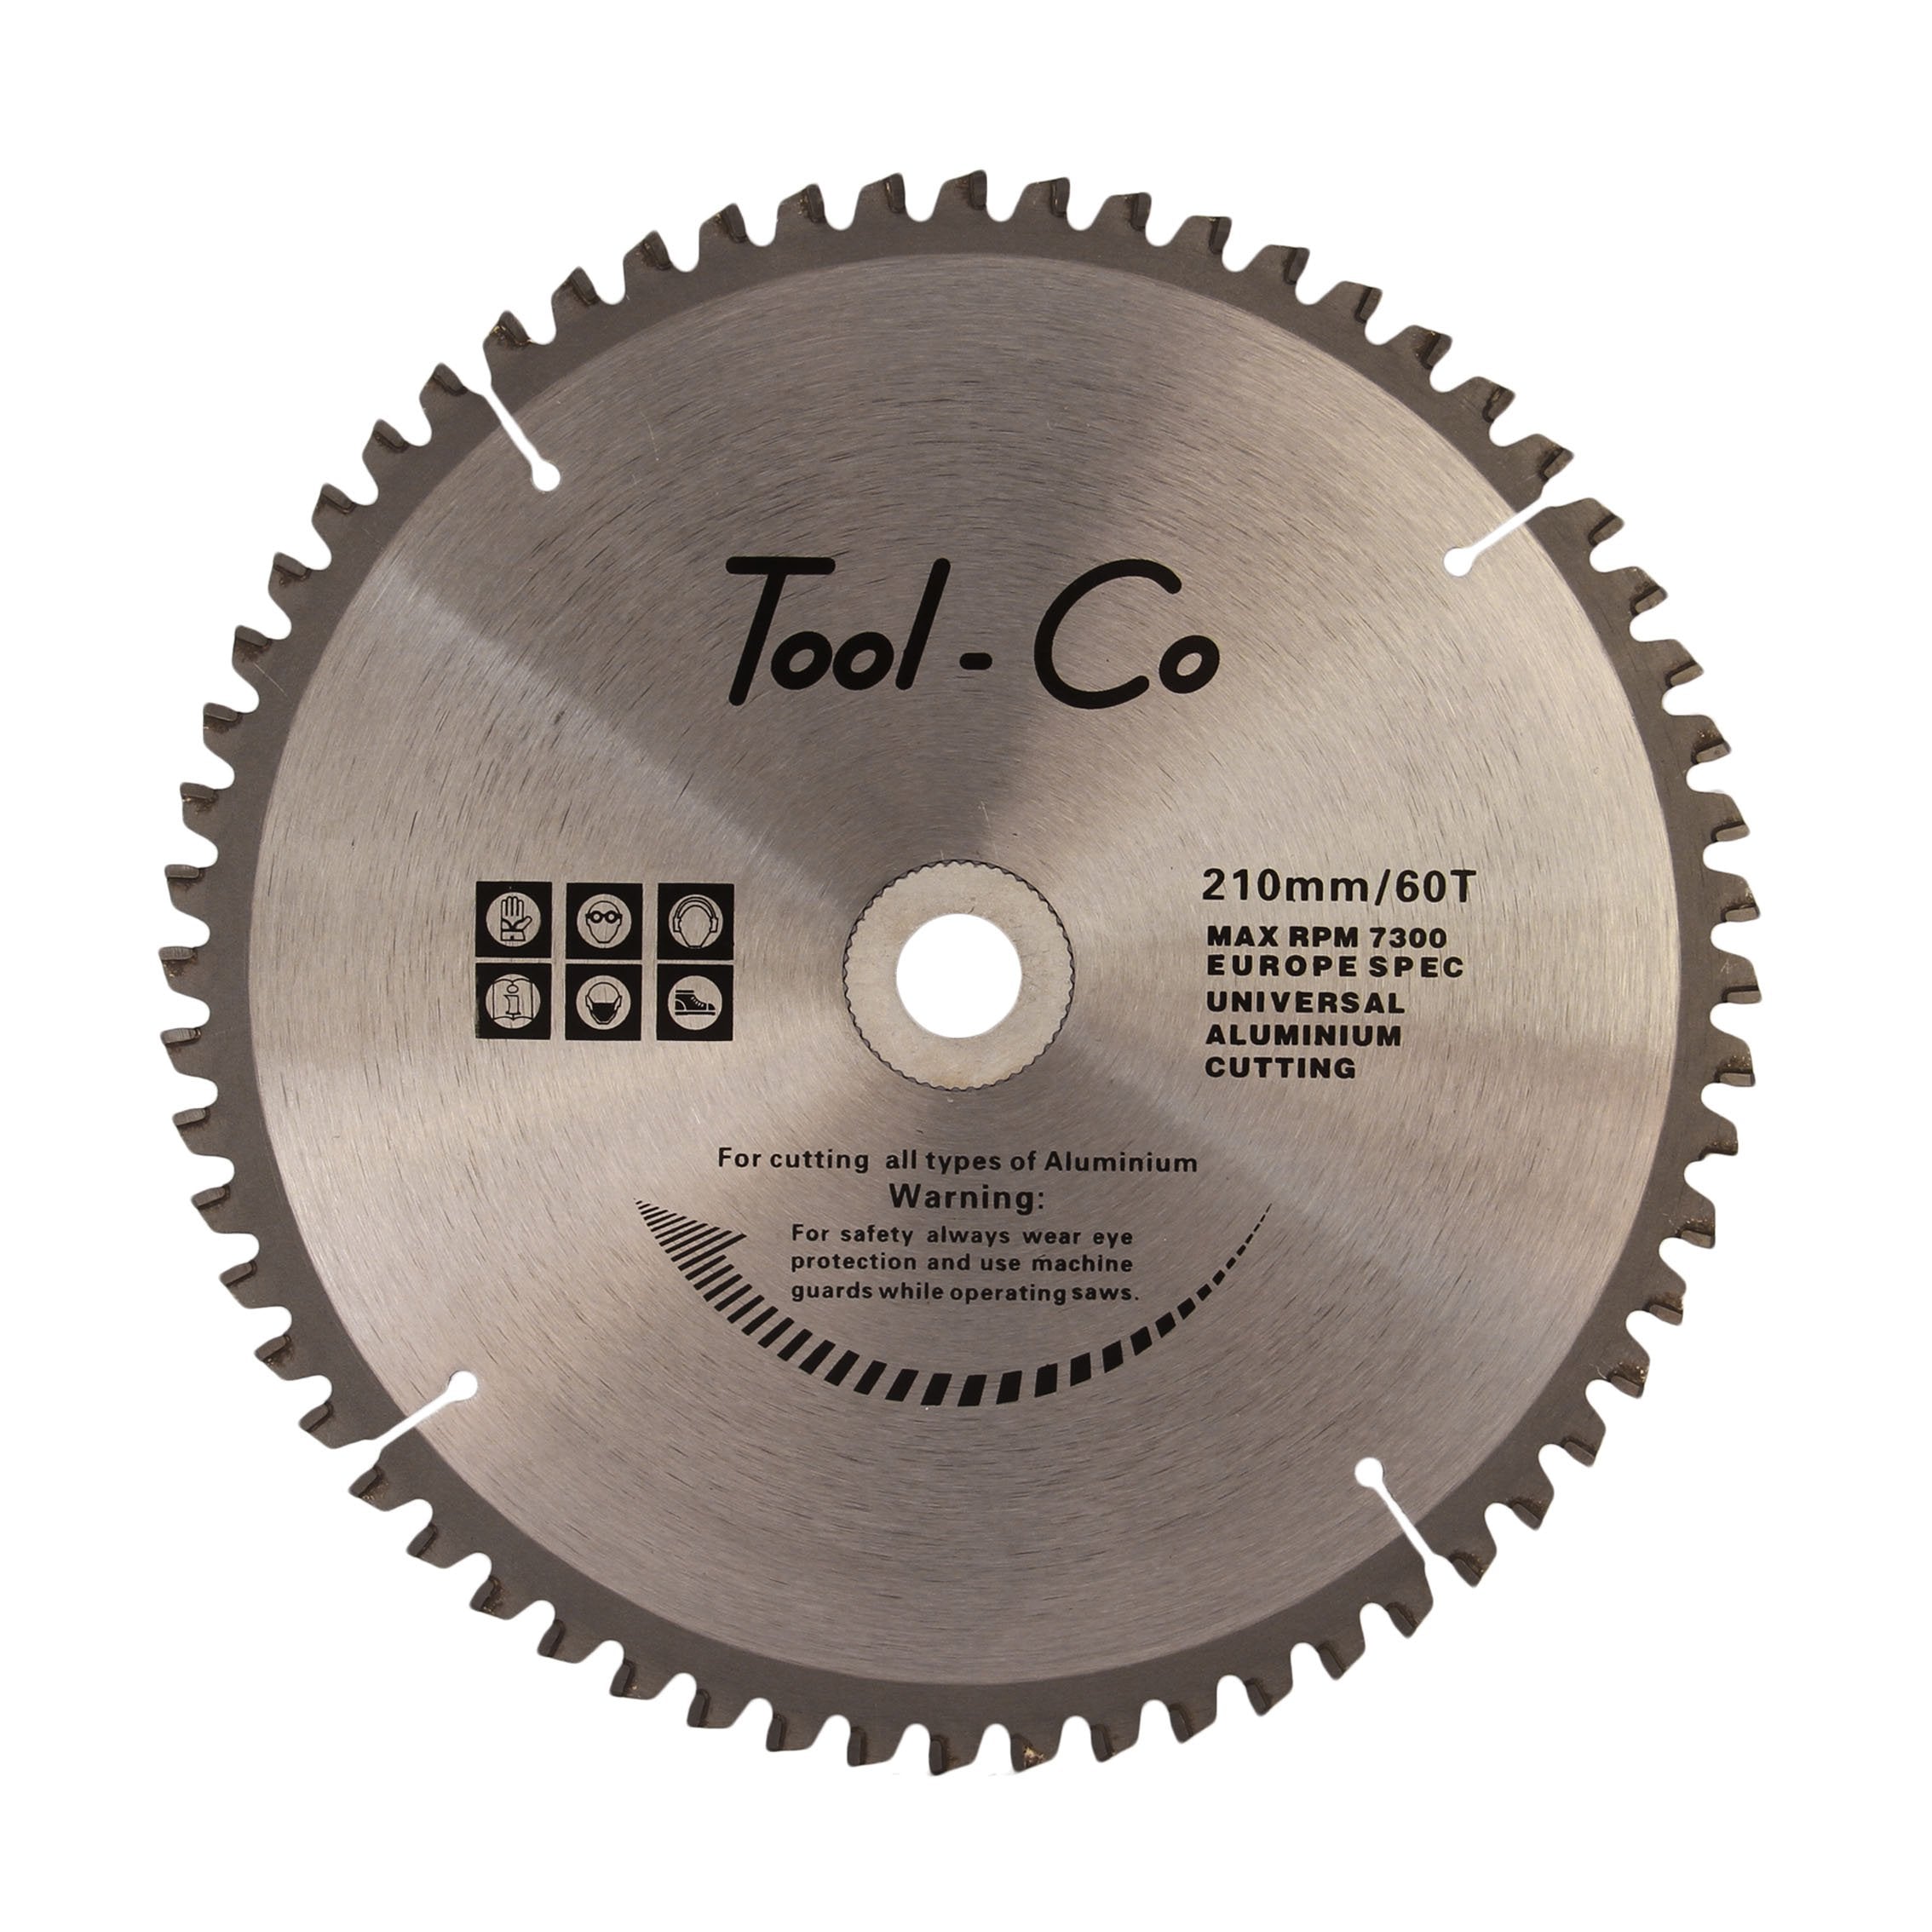 Tool-Co Circular Saw Blades For Aluminium 250mm 80t BX25080A Power Tool Services